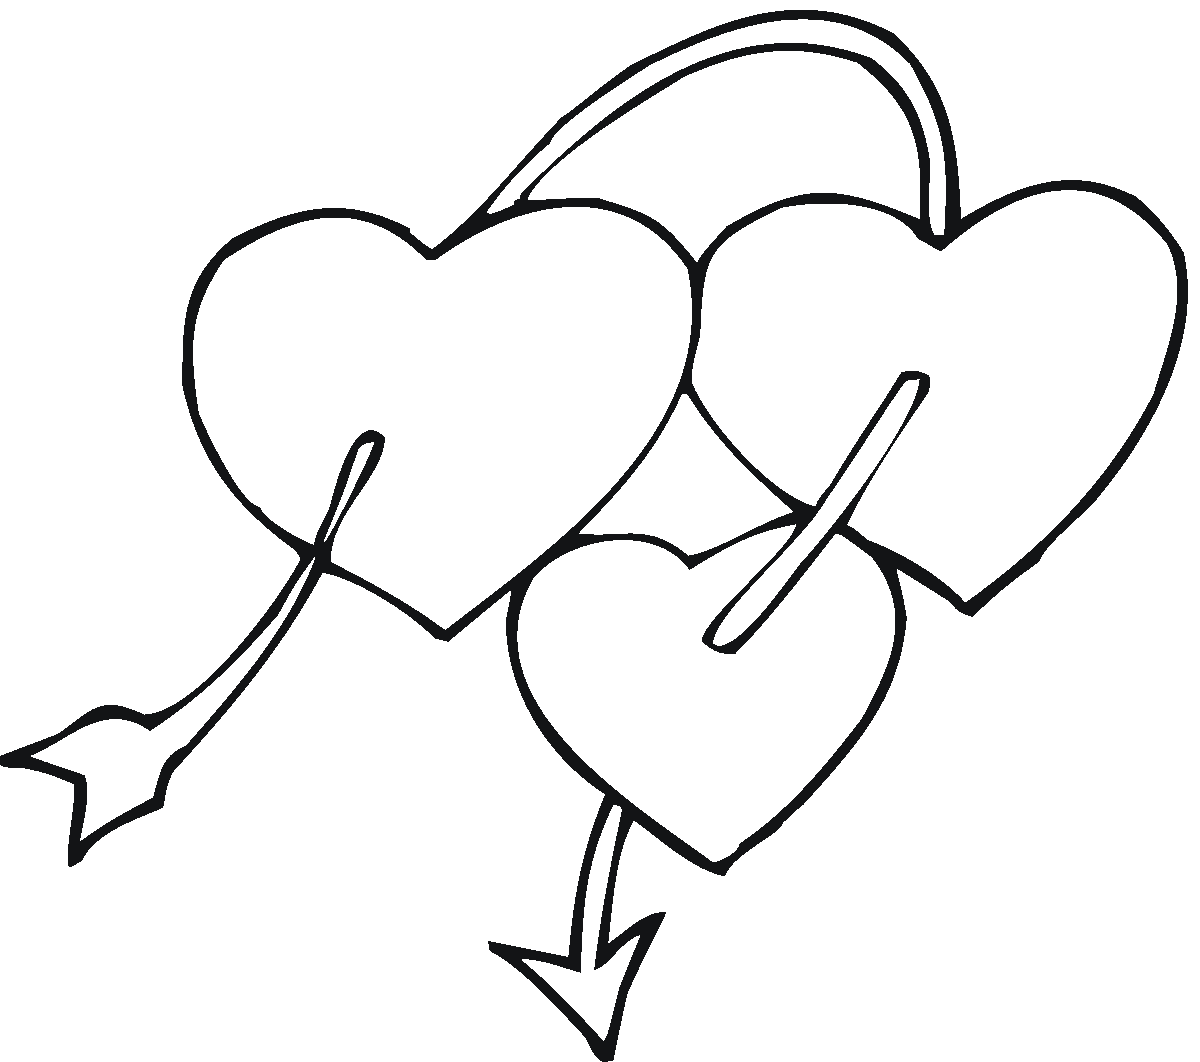 Pictures Of Hearts Drawings - ClipArt Best